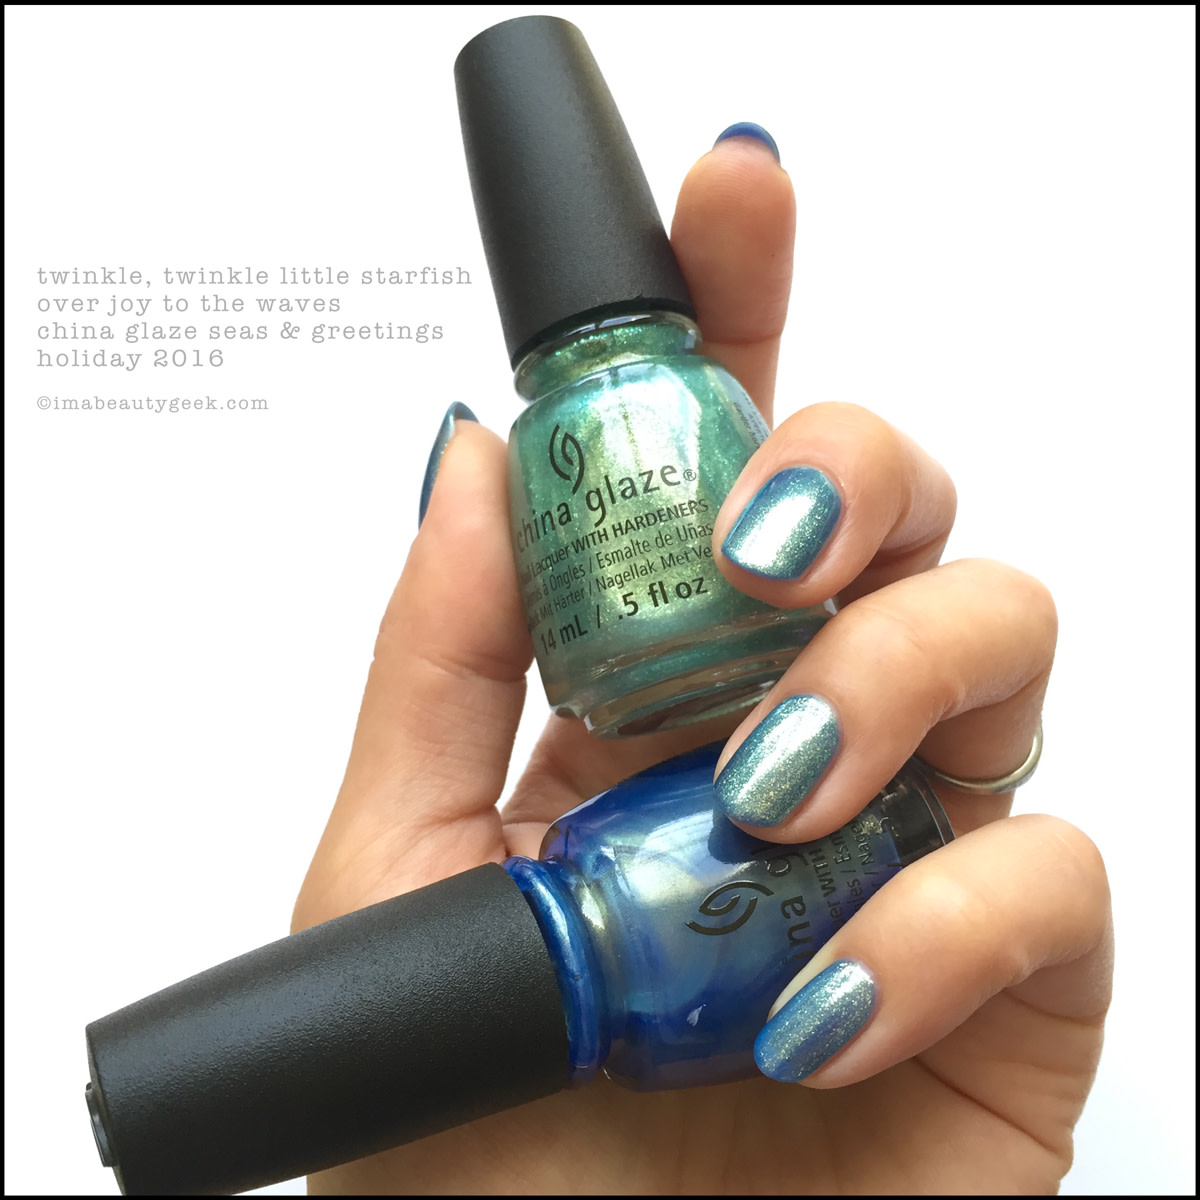 China Glaze Twinkle Twinkle Little Starfish over_China Glaze Seas Greetings Holiday 2016 Swatches Review